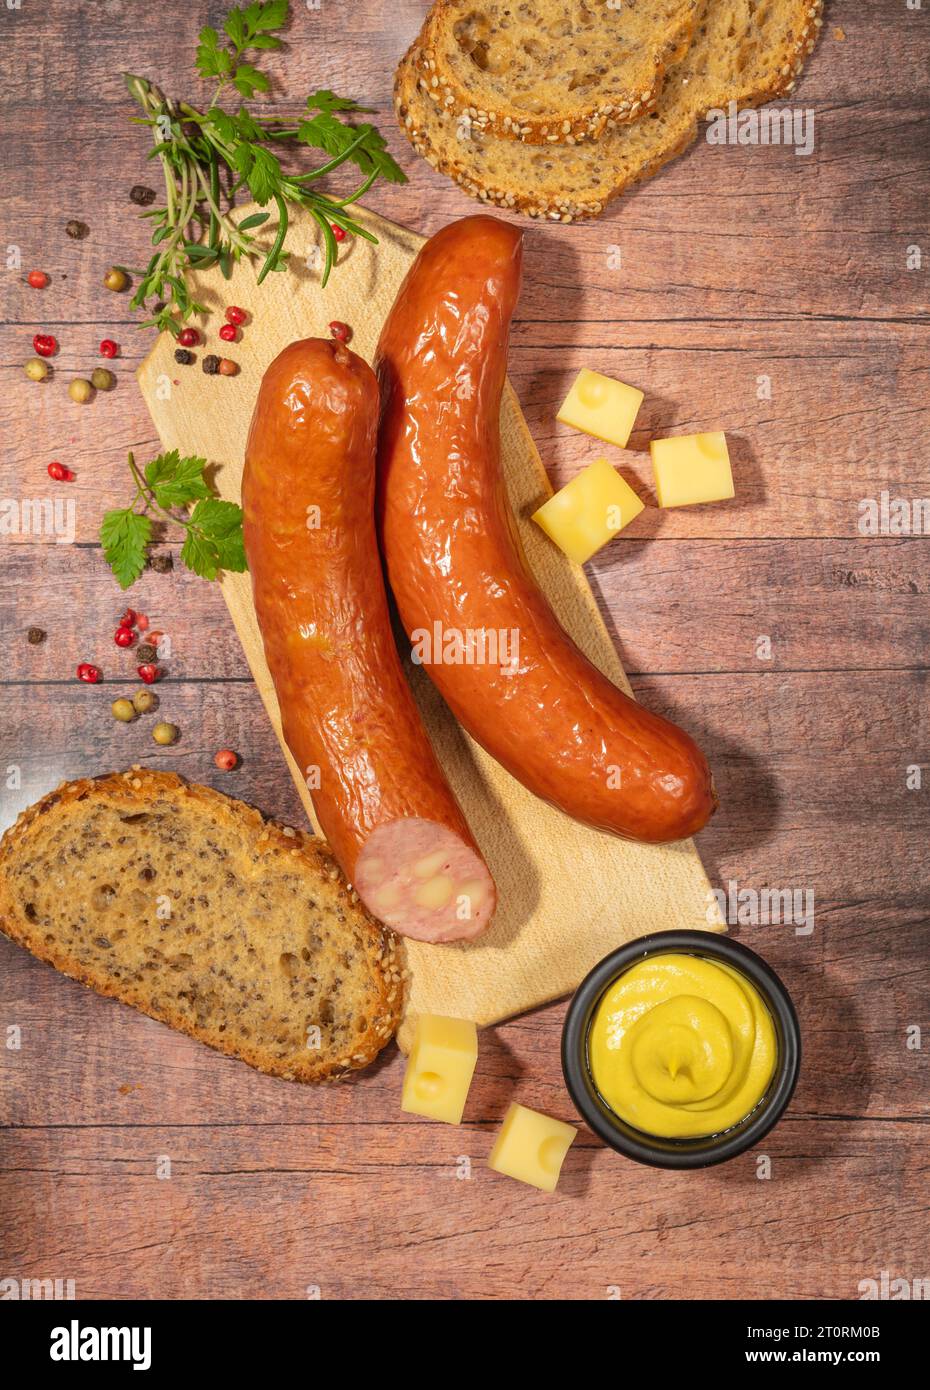 The 'Krainer Wurst' is a coarse boiled sausage that is popular as a traditional speciality in Austria and Slovenia. Stock Photo